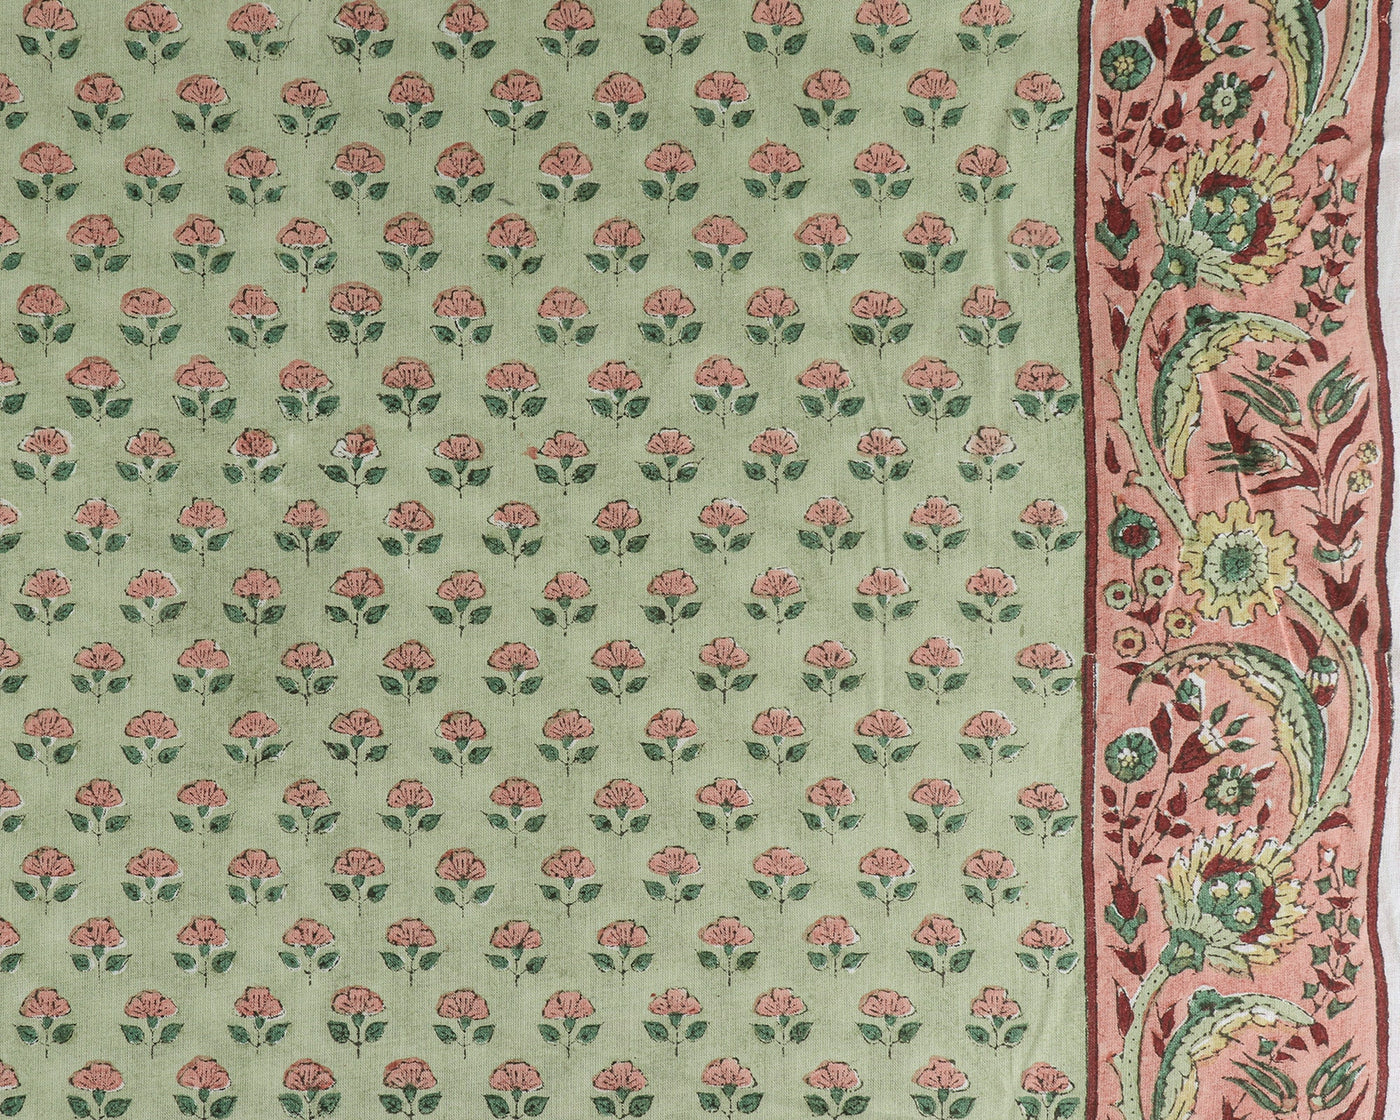 Light Swamp Green, New York Pink Indian Floral Hand Block Printed 100% Cotton Cloth, Fabric by the yard, Women's Clothing Curtains Pillows